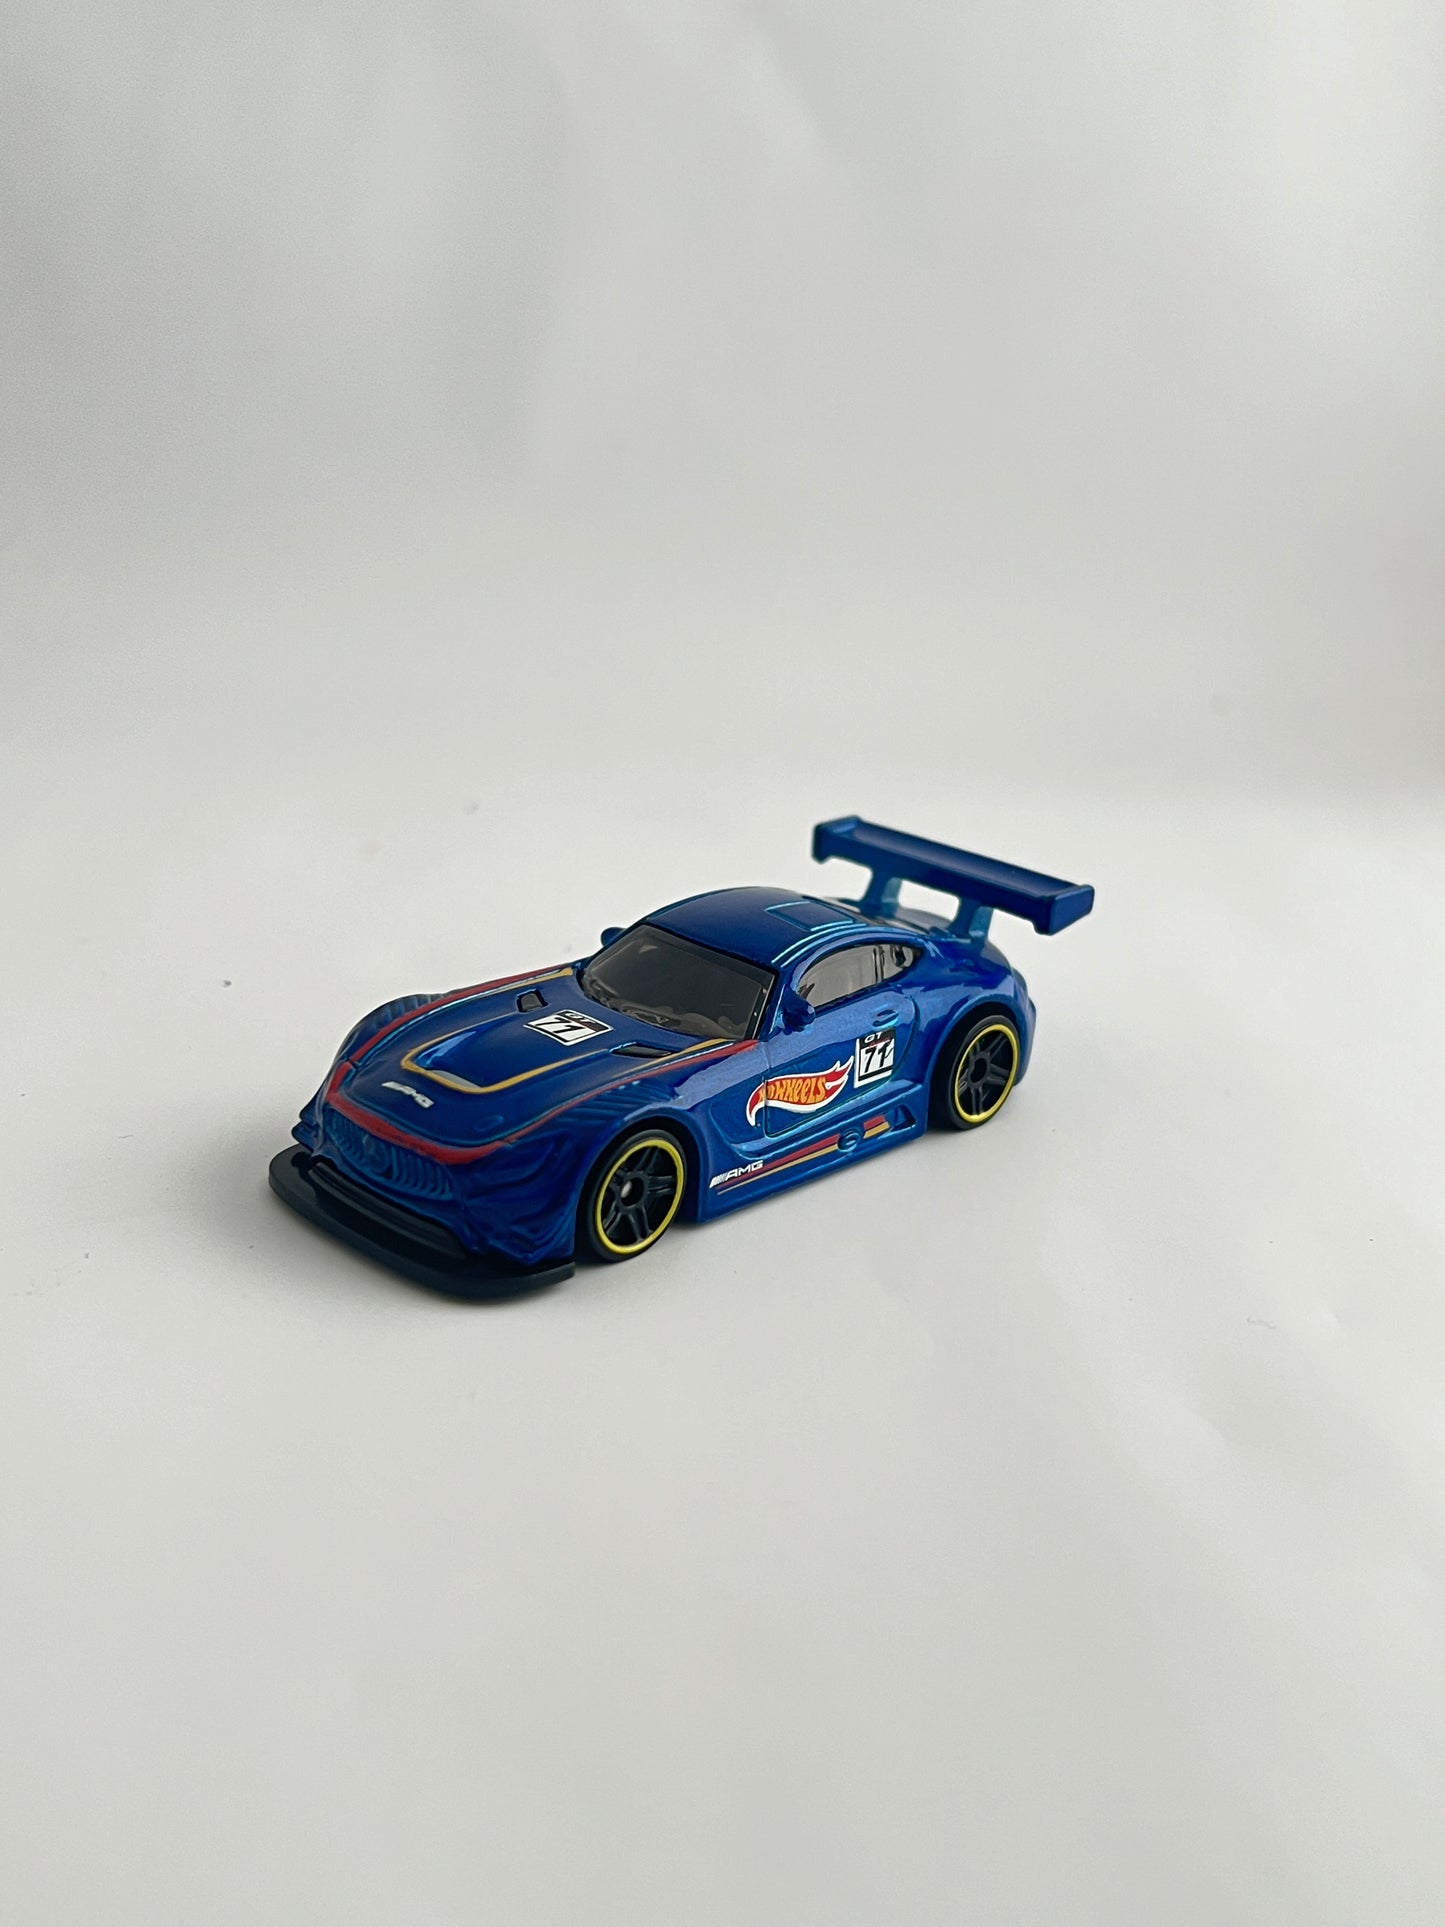 16 MERCEDES AMG GT3- UNCARDED - MINT CONDITION